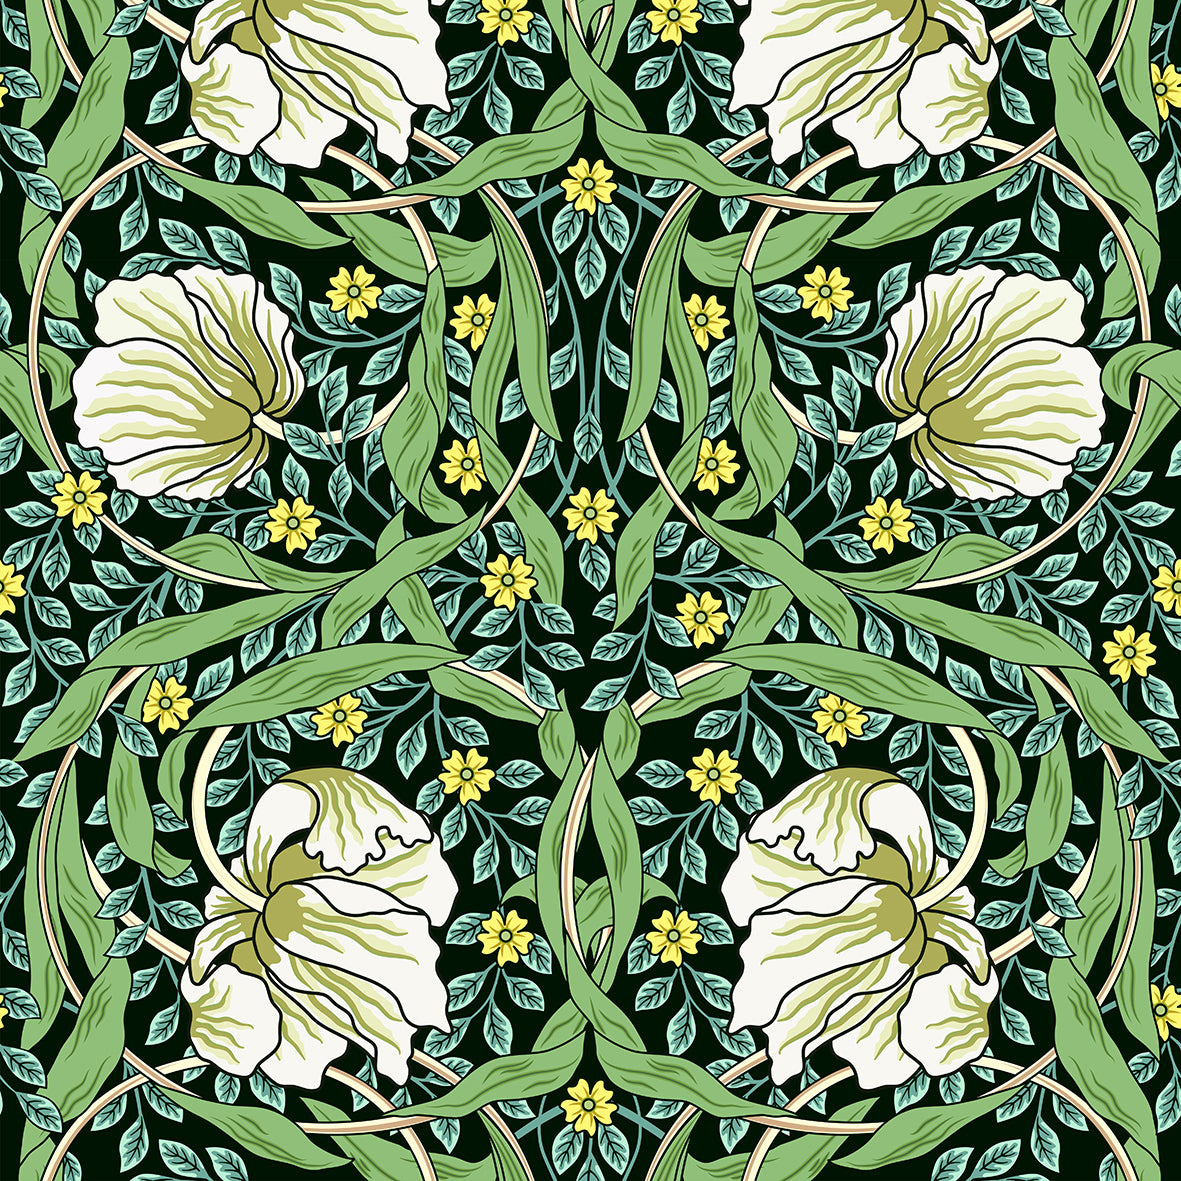 william-morris-co-table-runner-pimpernel-collection-green-2